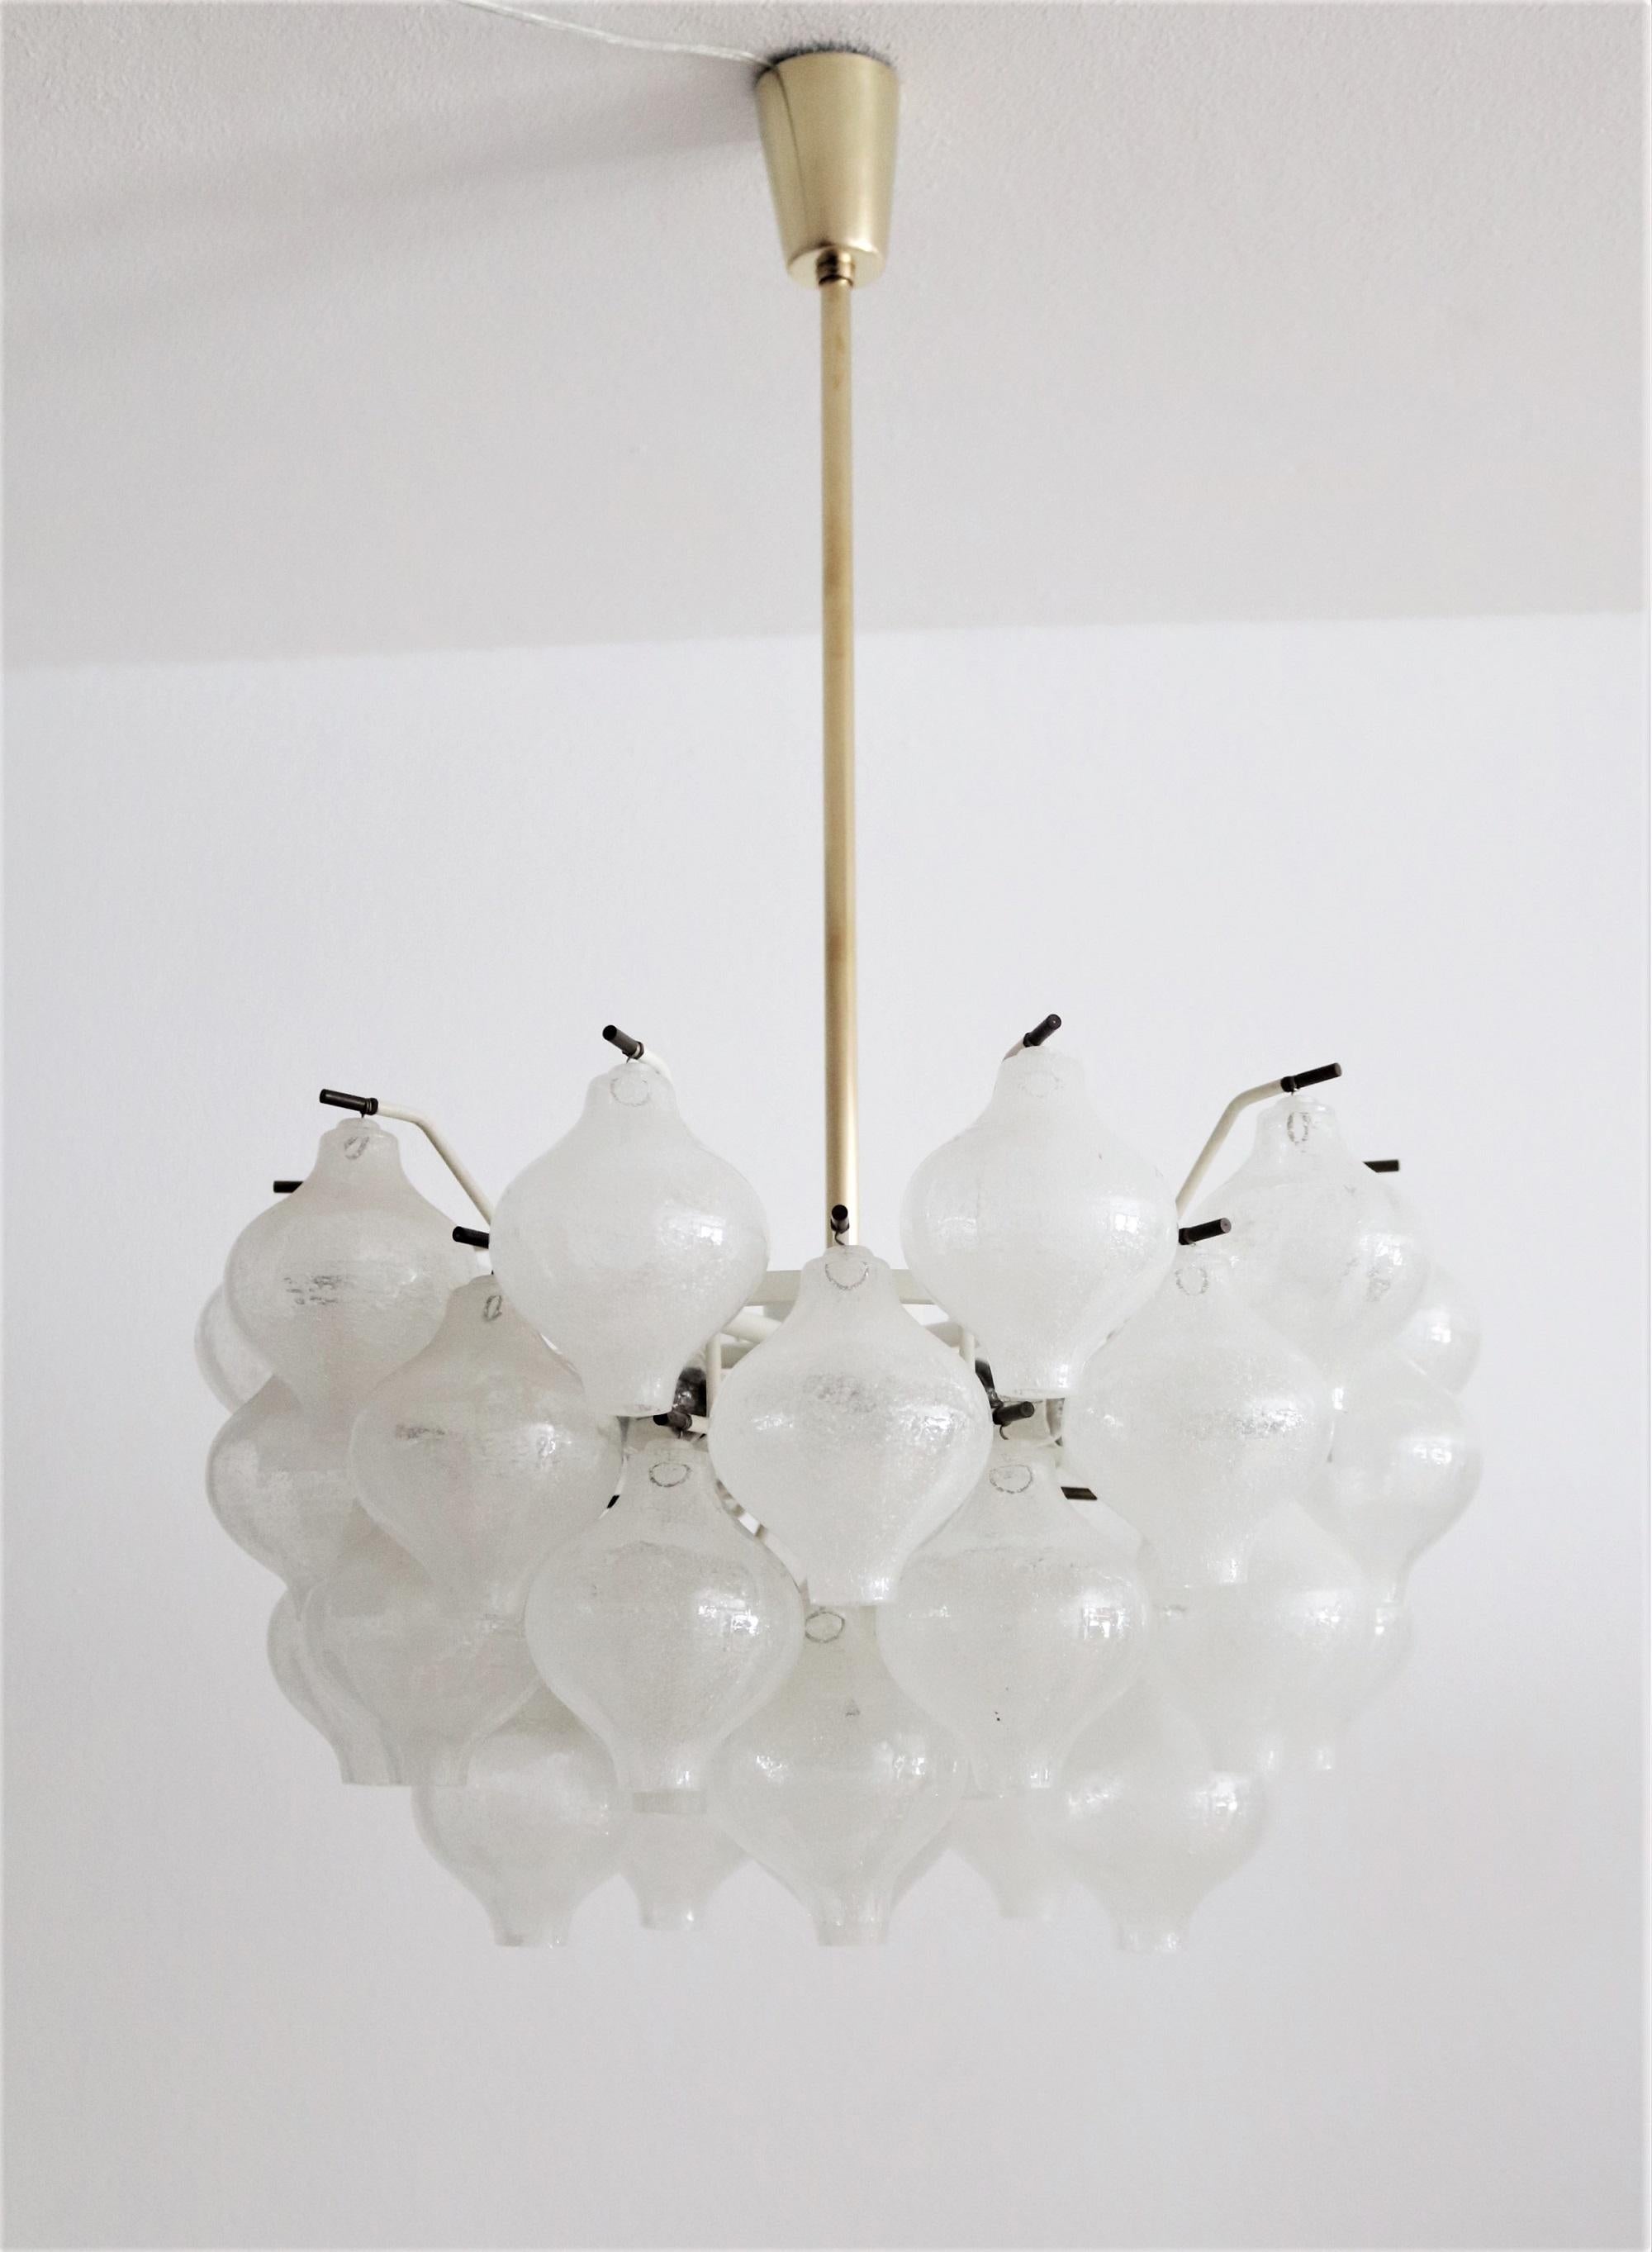 A gorgeous modernist brass and Murano glass chandelier pendant light from the 1960s. 
Called 'Tulipan', designed and manufactured by Kalmar Vienna, Austria. The glasses have been manufactured at that time in Murano/Italy.
The chandelier has 41 hand